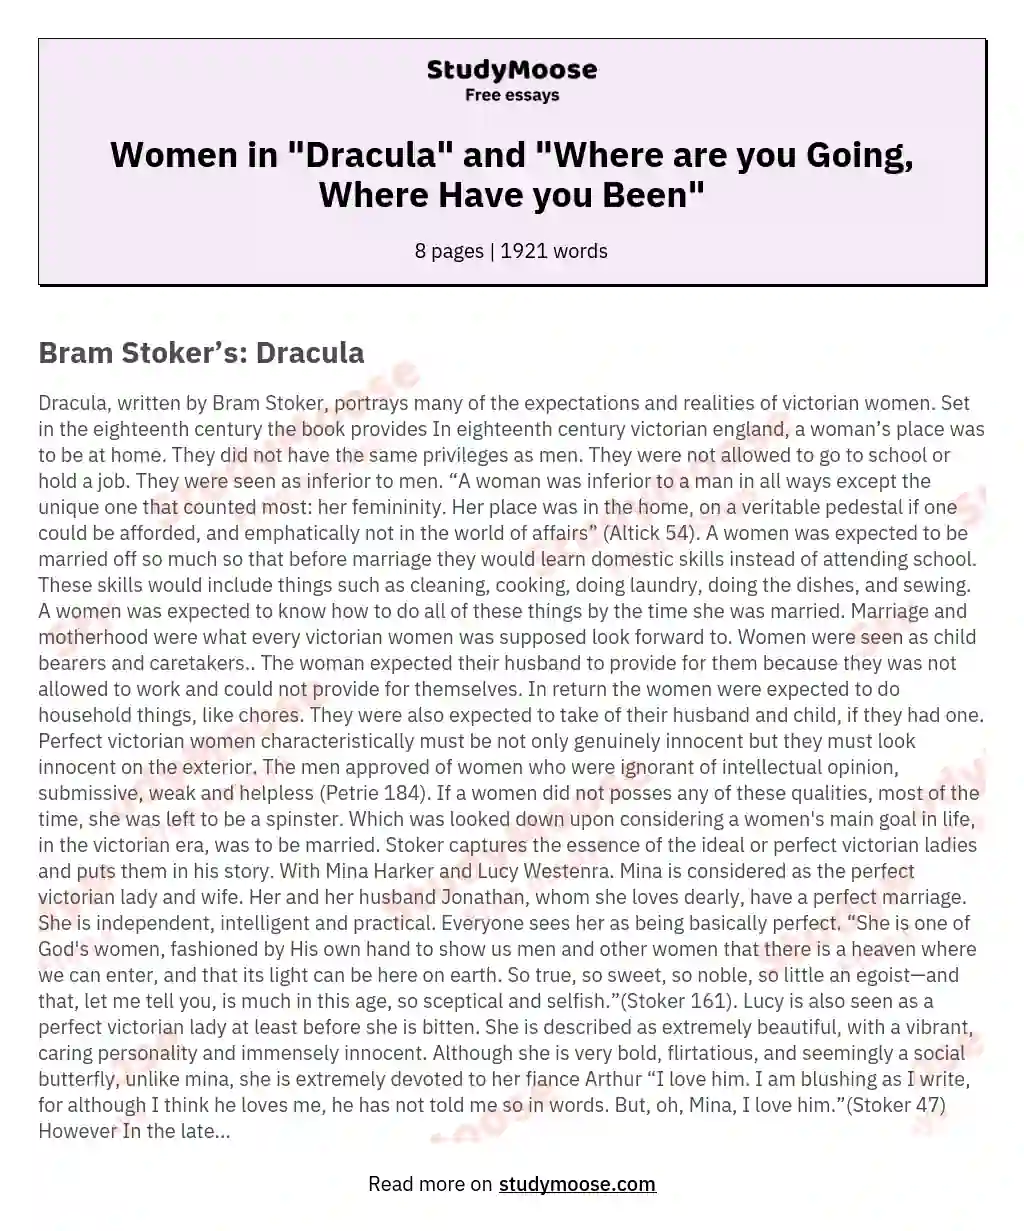 Women in "Dracula" and "Where are you Going, Where Have you Been"